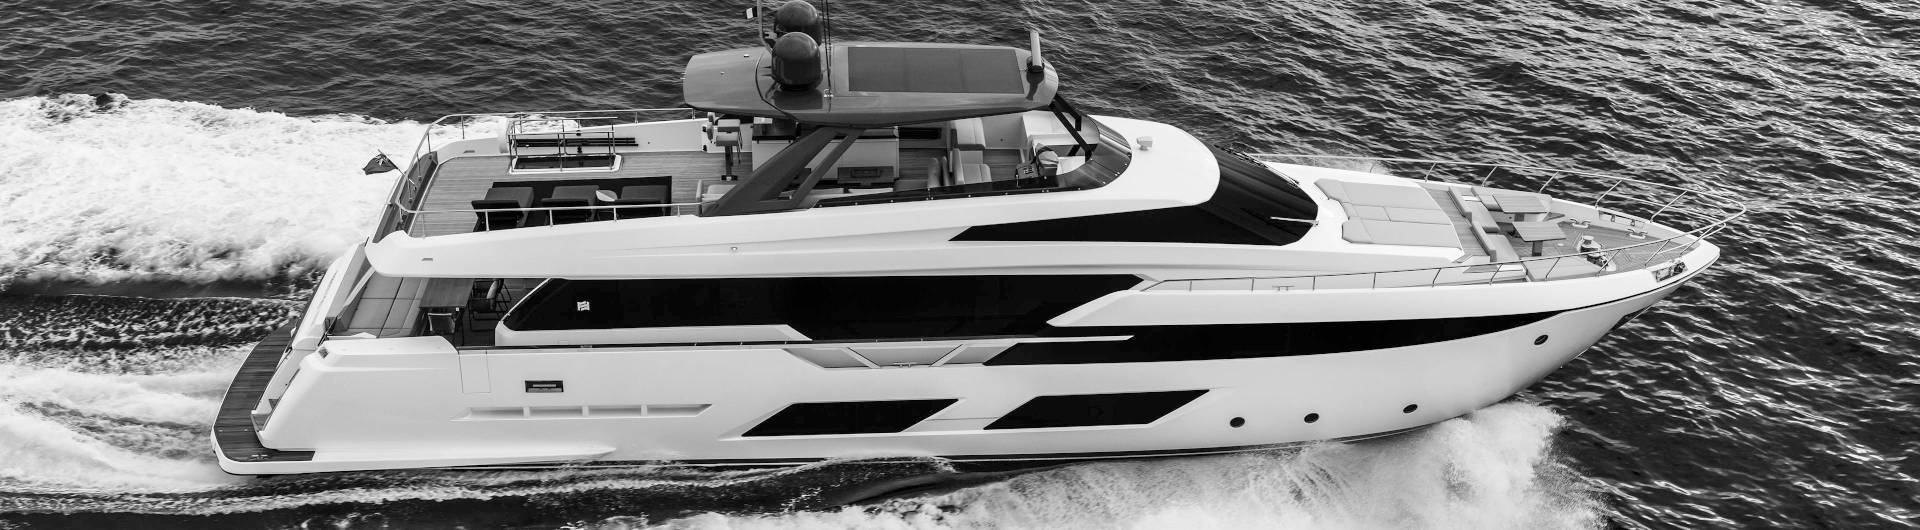 yacht boat price